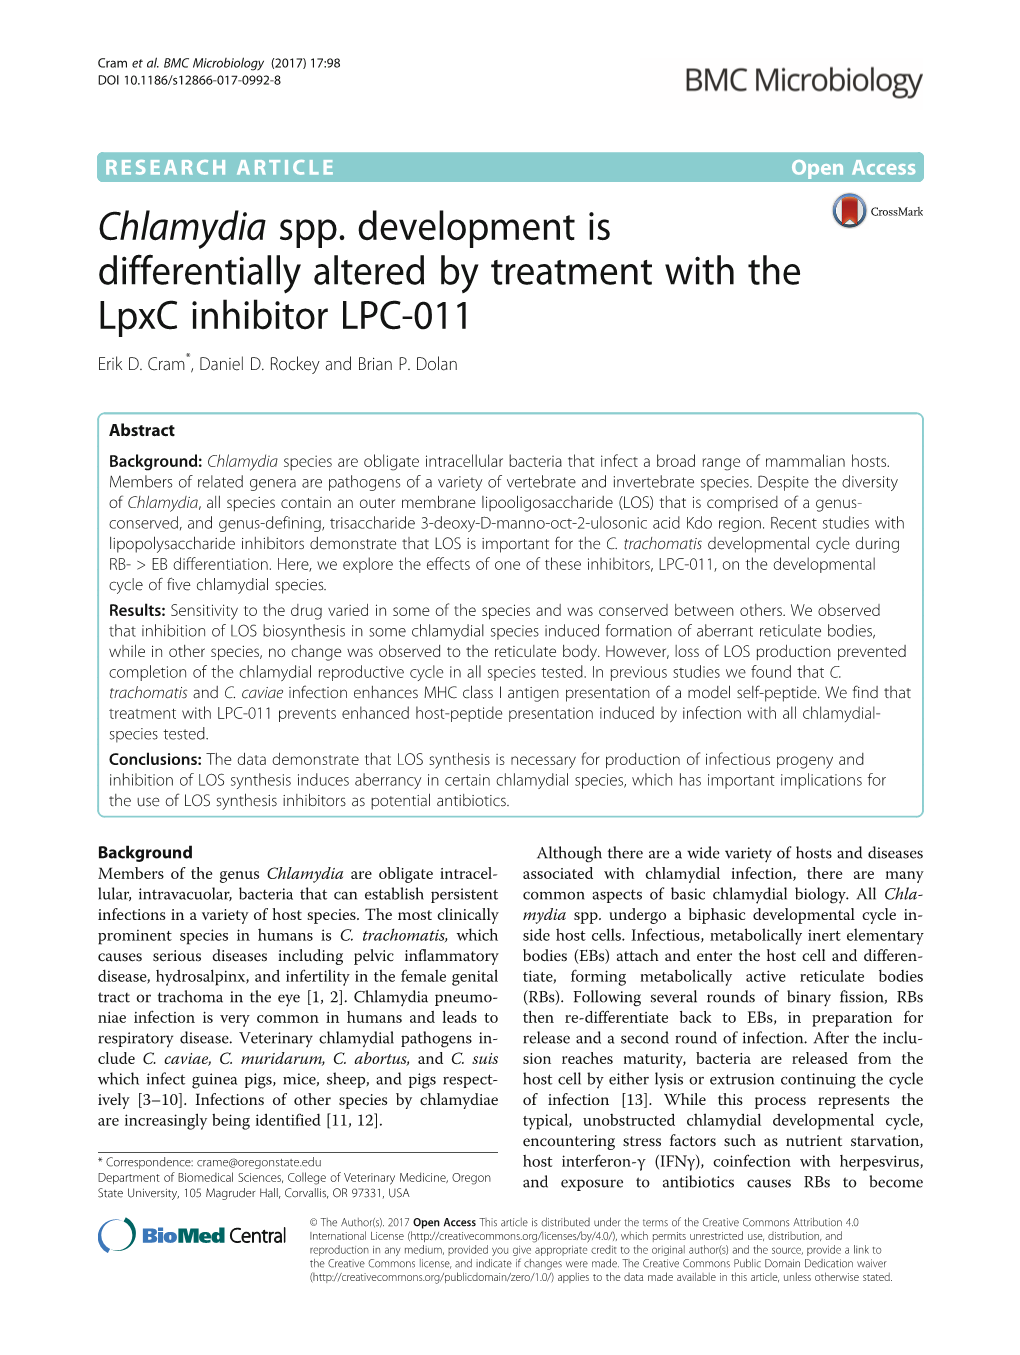 Chlamydia Spp. Development Is Differentially Altered by Treatment with the Lpxc Inhibitor LPC-011 Erik D